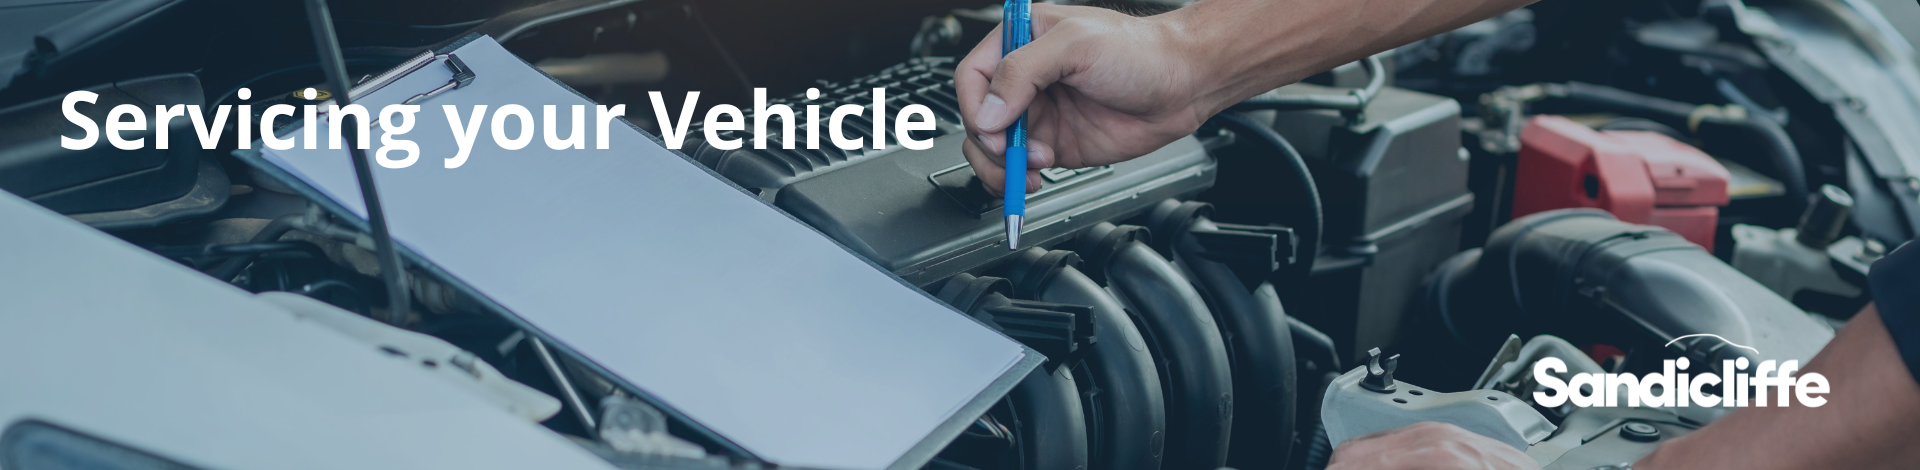 Why is servicing your Vehicle important?